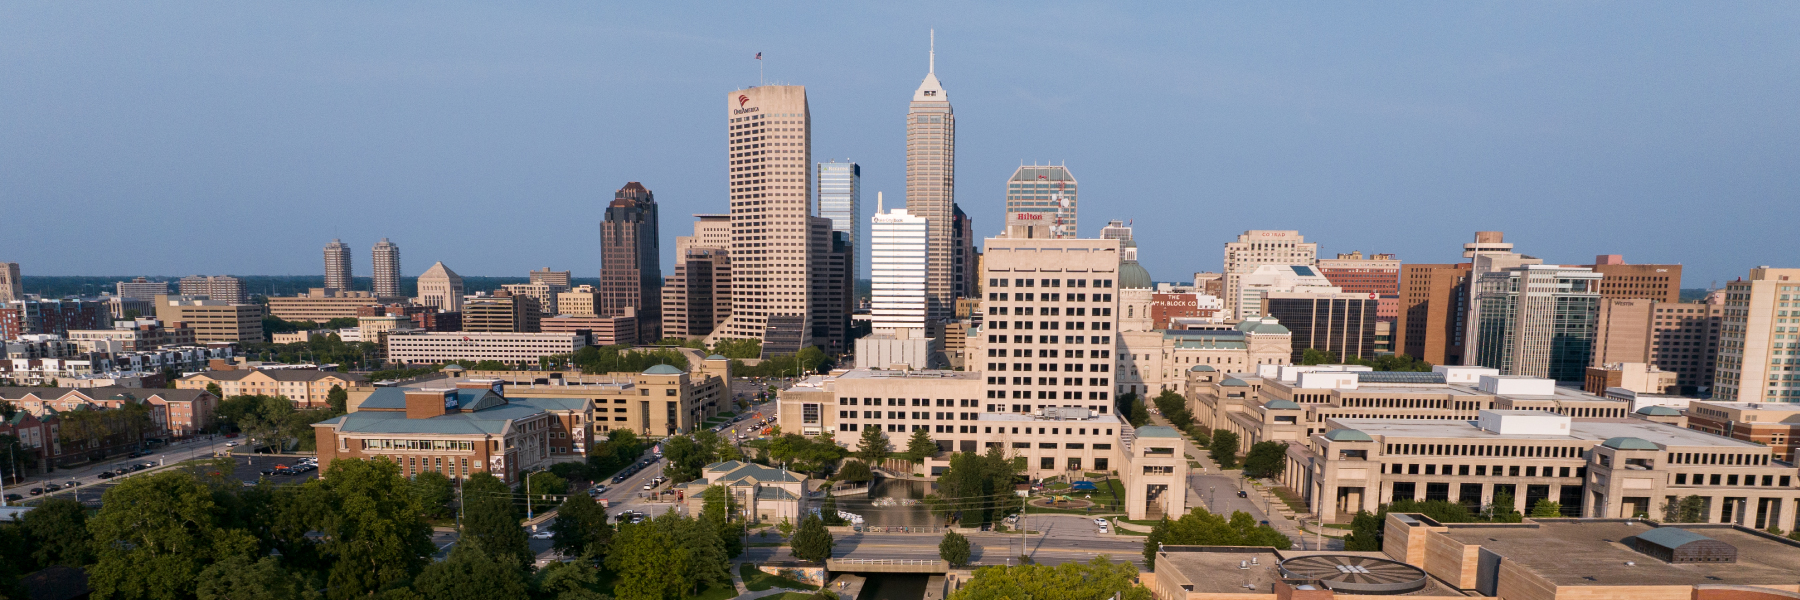 A skyline view of downtown Indianapolis.